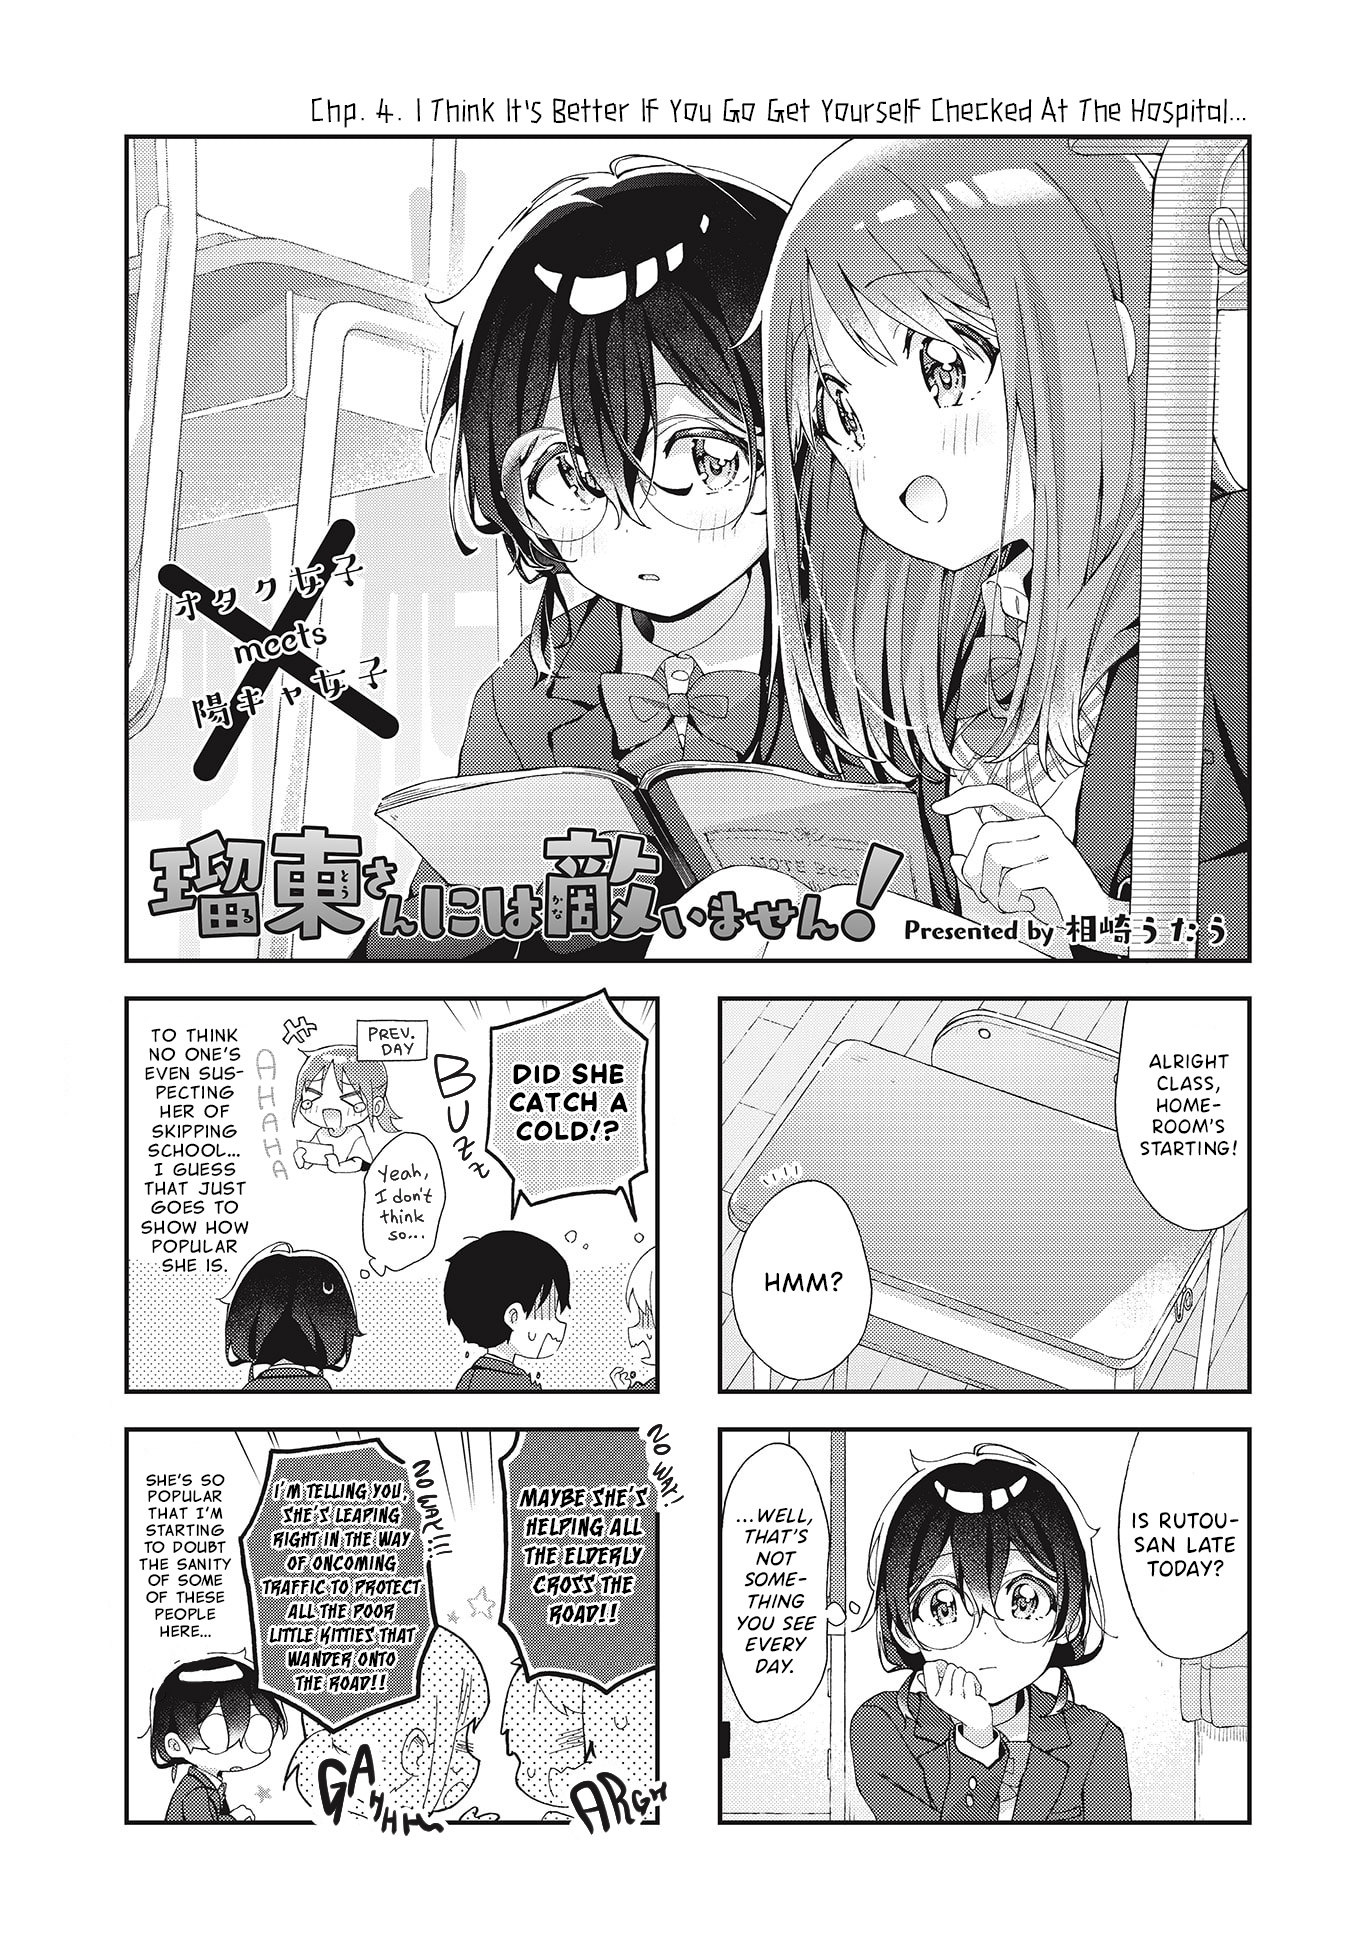 Rutou-San Ni Wa Kanaimasen! Vol.1 Chapter 4: I Think It's Better If You Go Get Yourself Checked At The Hospital... - Picture 1